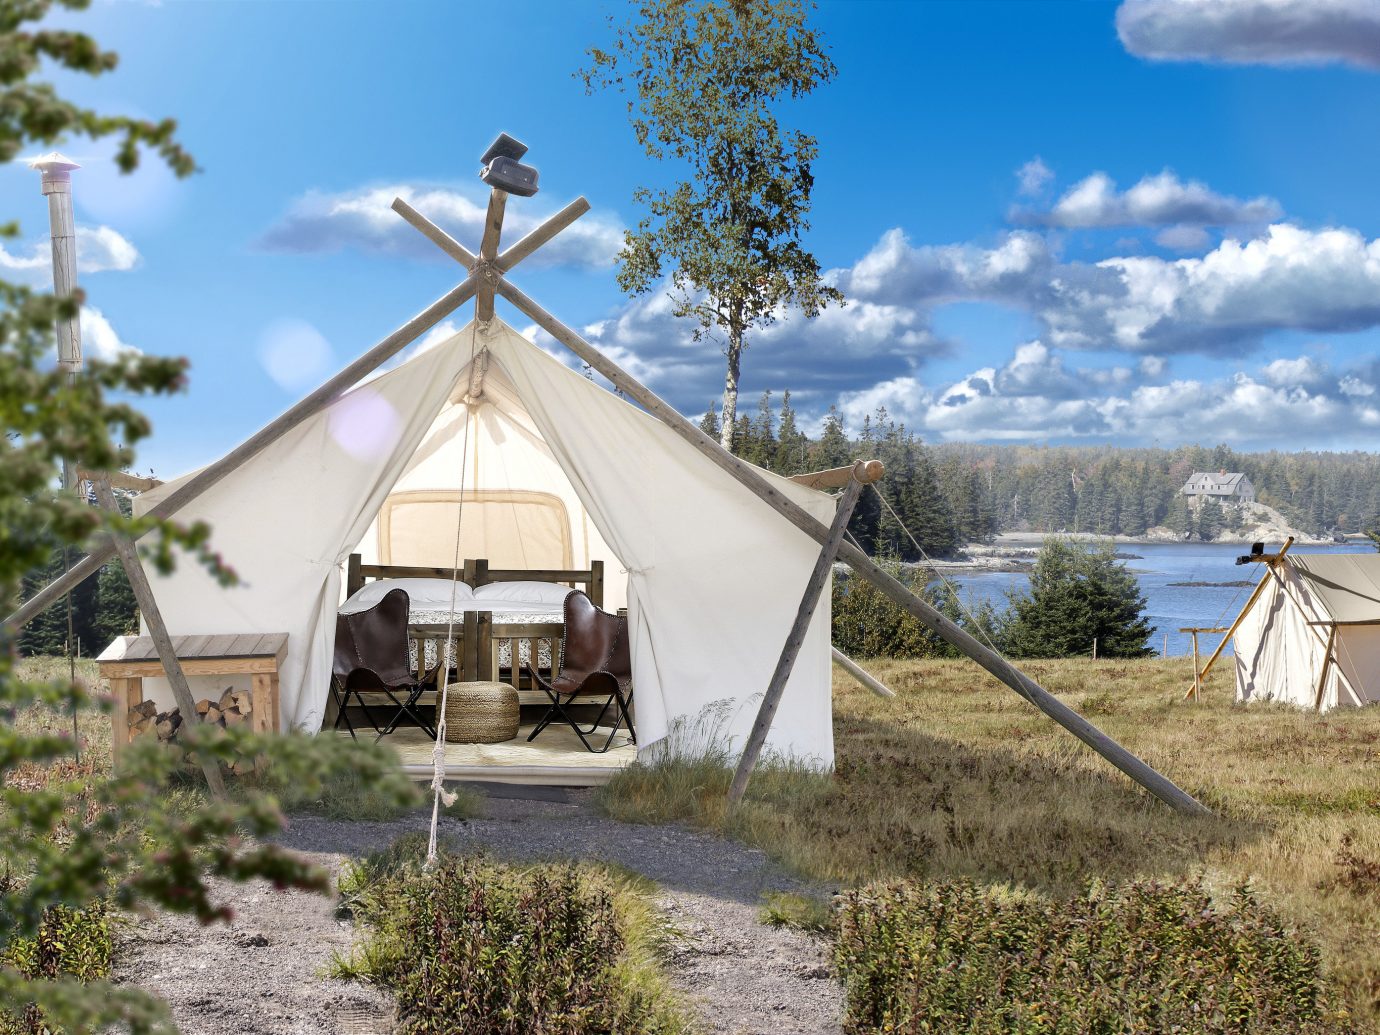 Glamping Luxury Travel Outdoors + Adventure Trip Ideas Weekend Getaways sky outdoor tree grass building cottage home tepee hut house rural area real estate cloud yurt landscape mountain